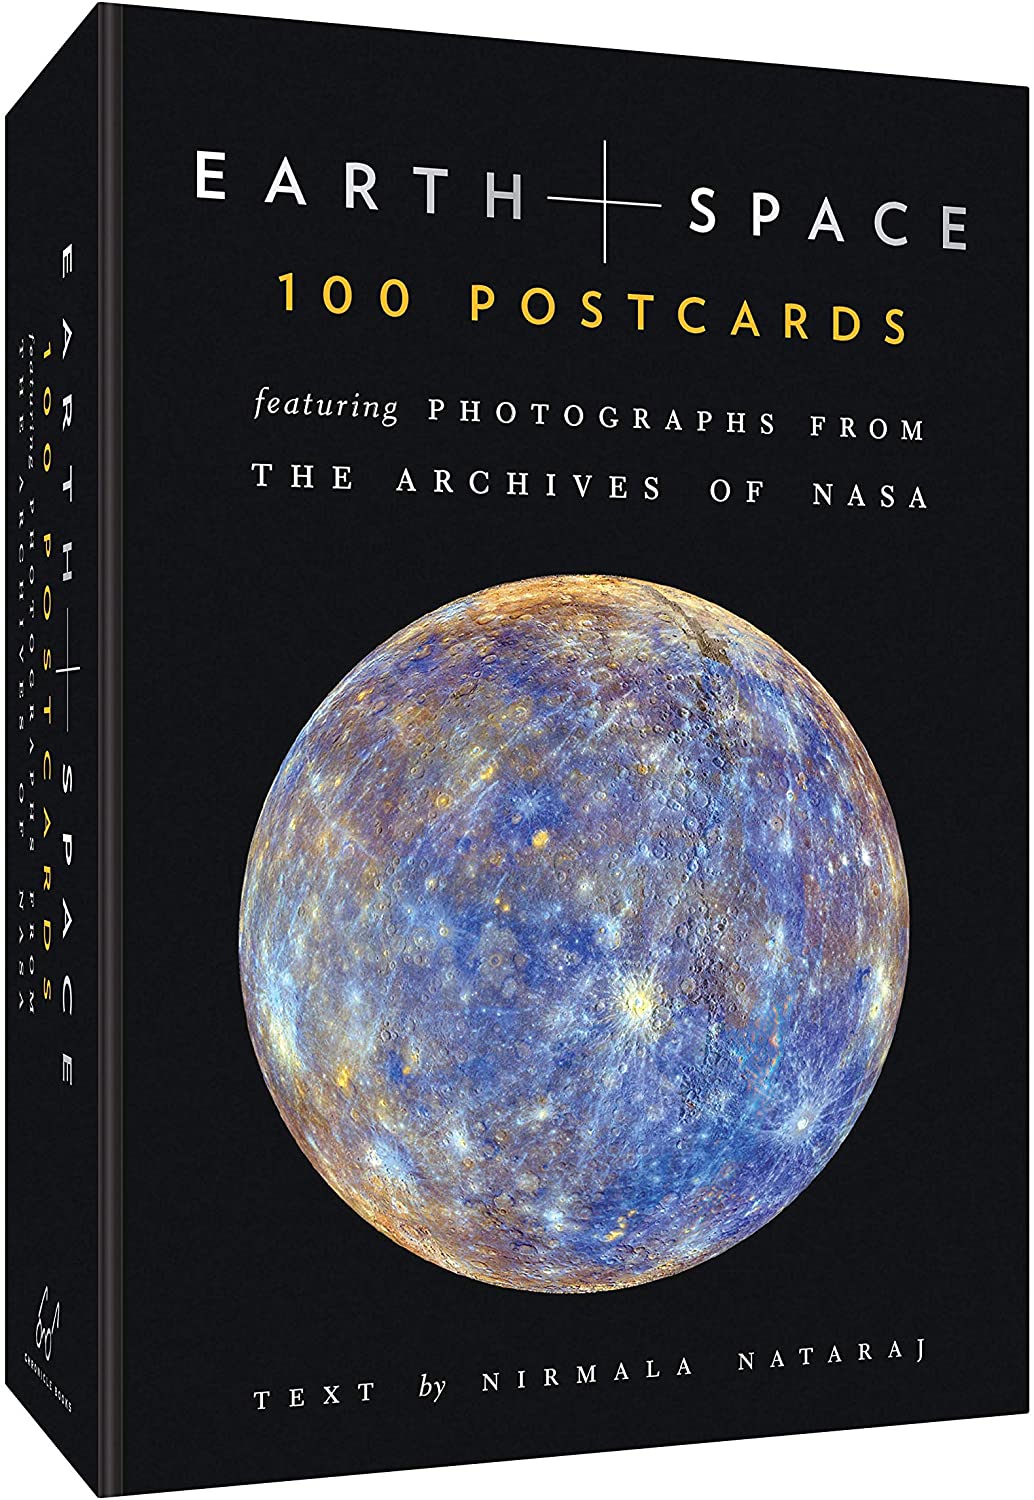 Earth and Space 100 Postcards: - Box of Collectible Postcards Featuring Photographs from the Archives of Nasa, Stationery That Makes a Great Gift for (Novelty)